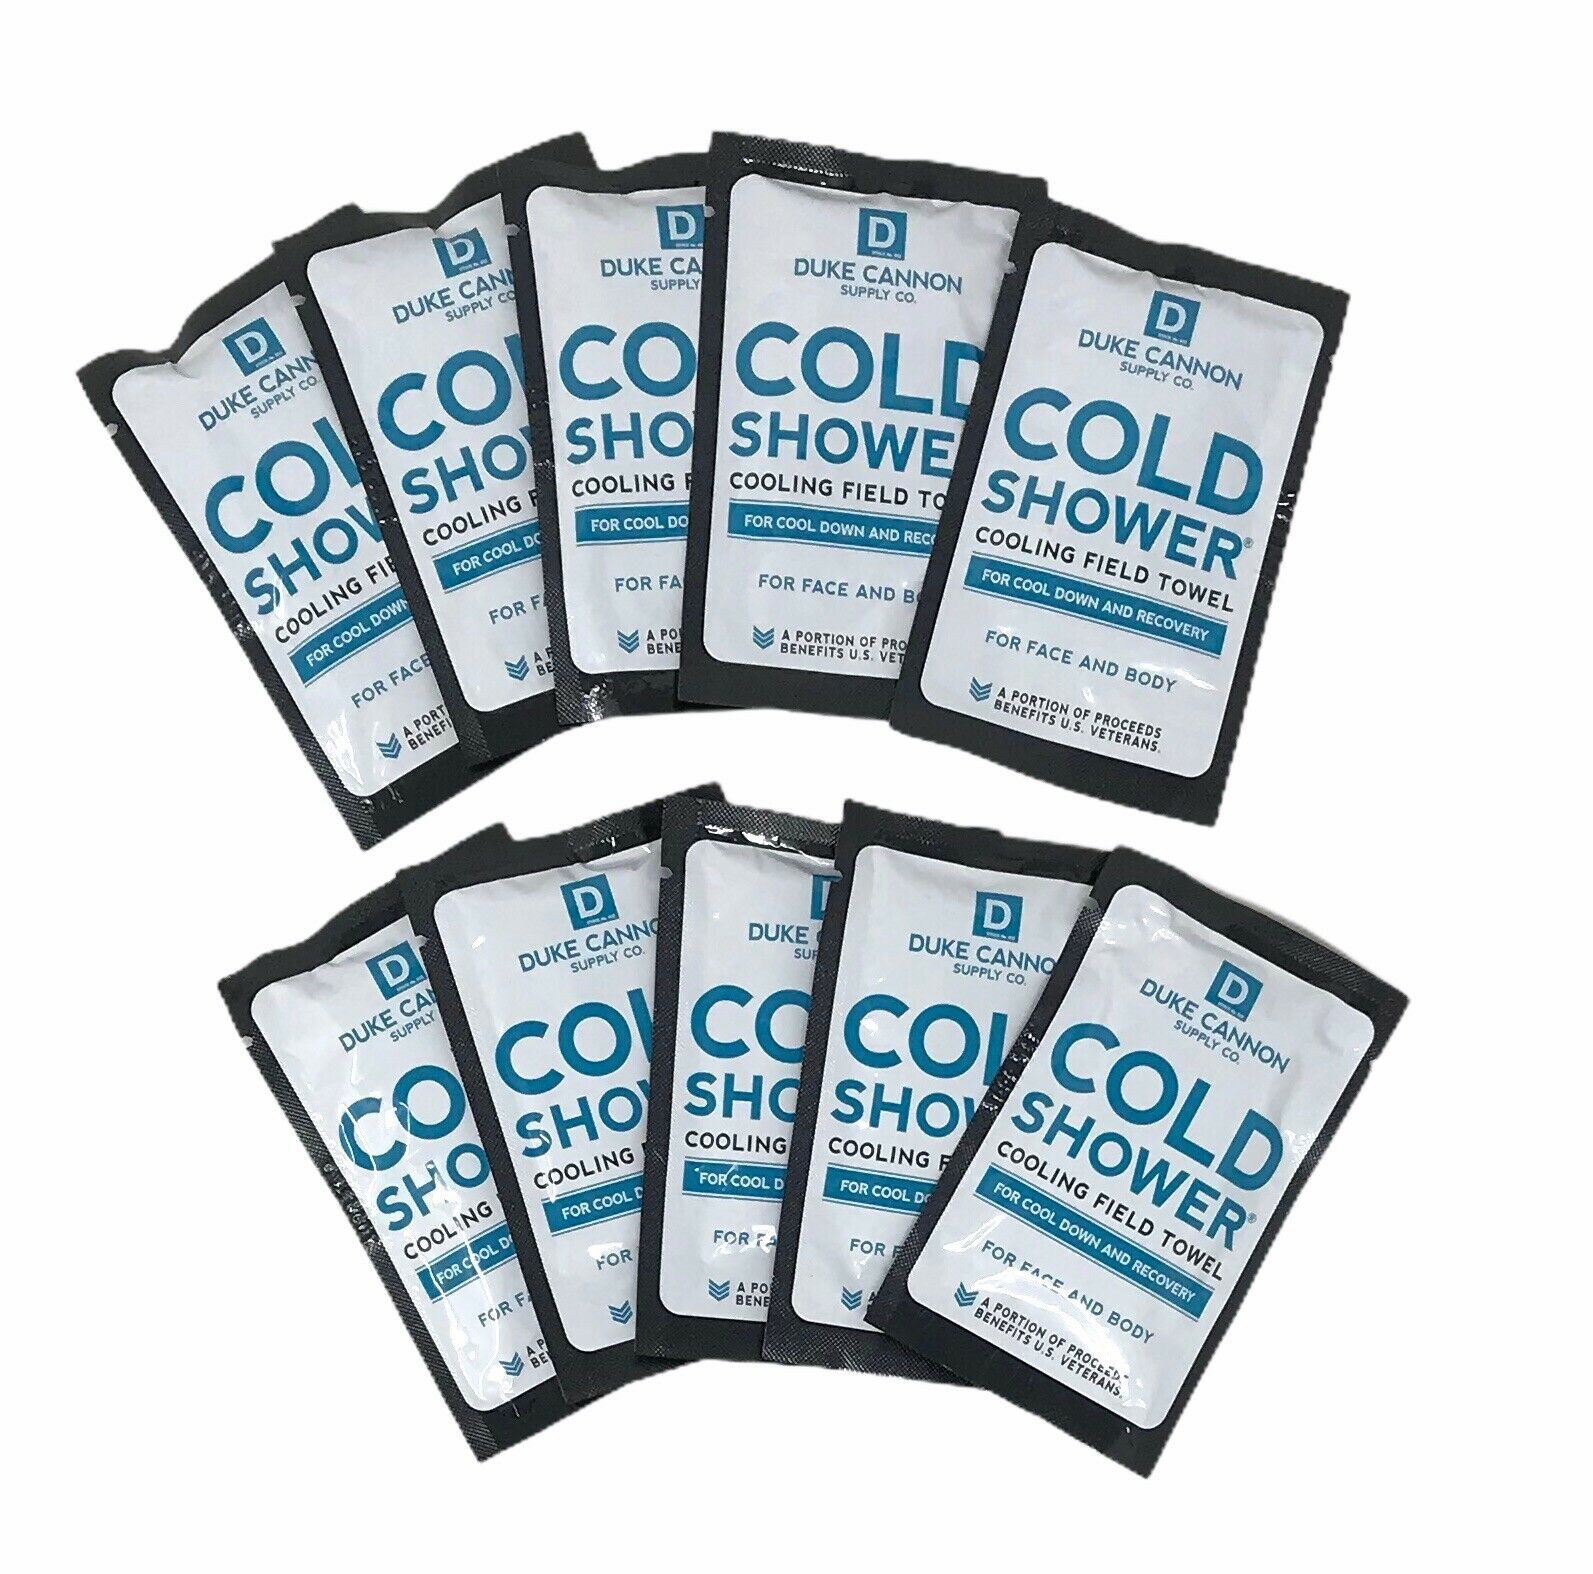 Cold Shower Cooling Field Towels - 3 Towelettes